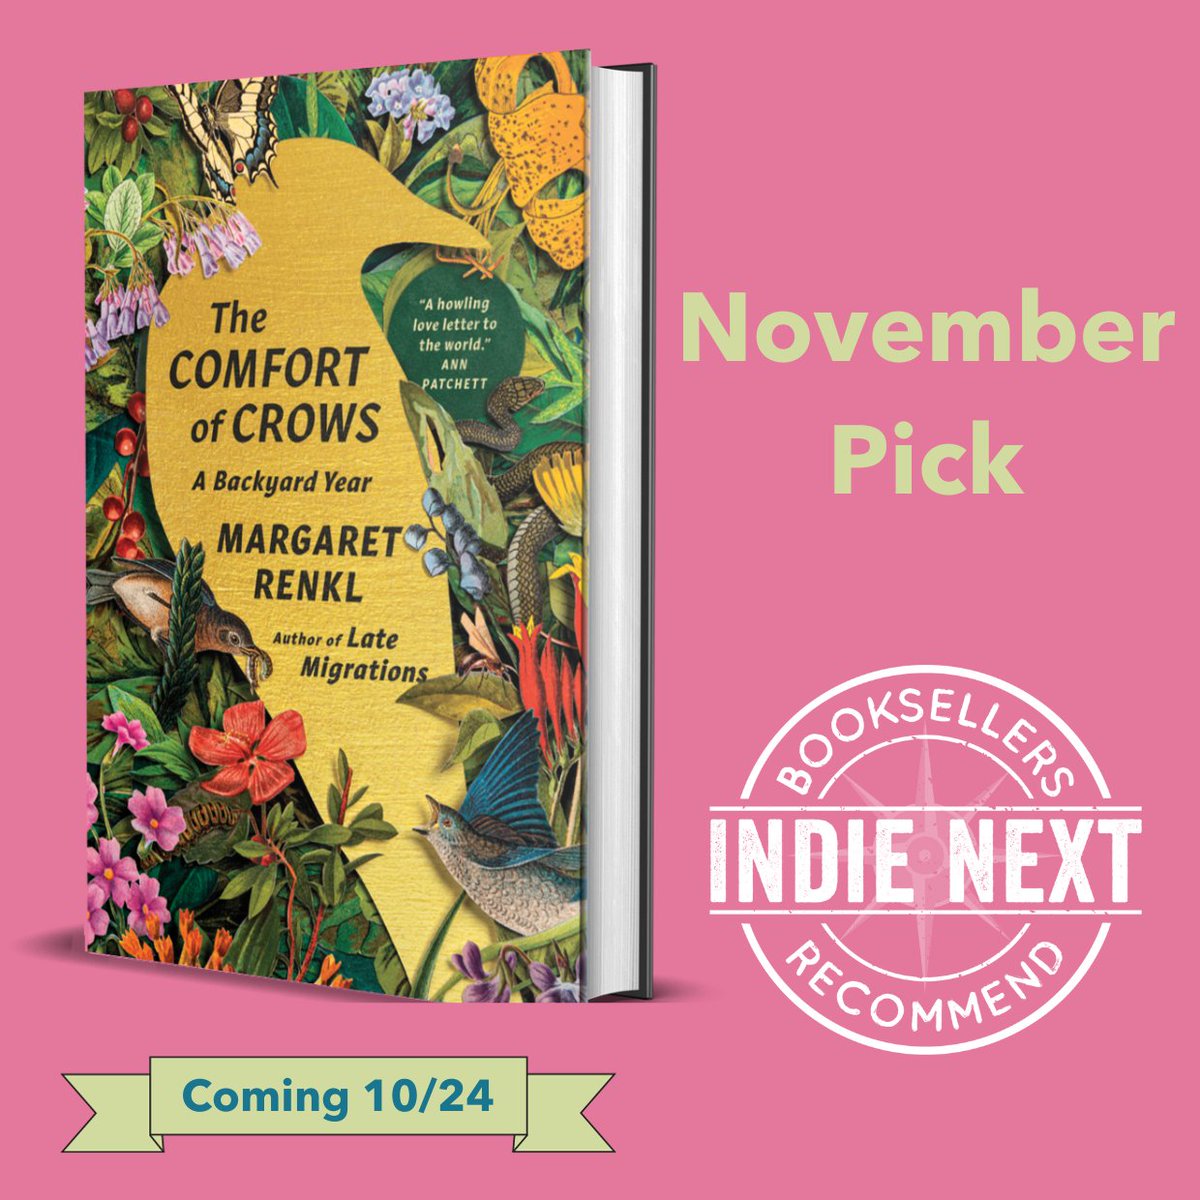 We are so excited to announce that @MargaretRenkl's The Comfort of Crows is a November Indie Next Pick! Pre-order this “triumph of a book” (Aimee Nezhukumatathil) from your local indie today!